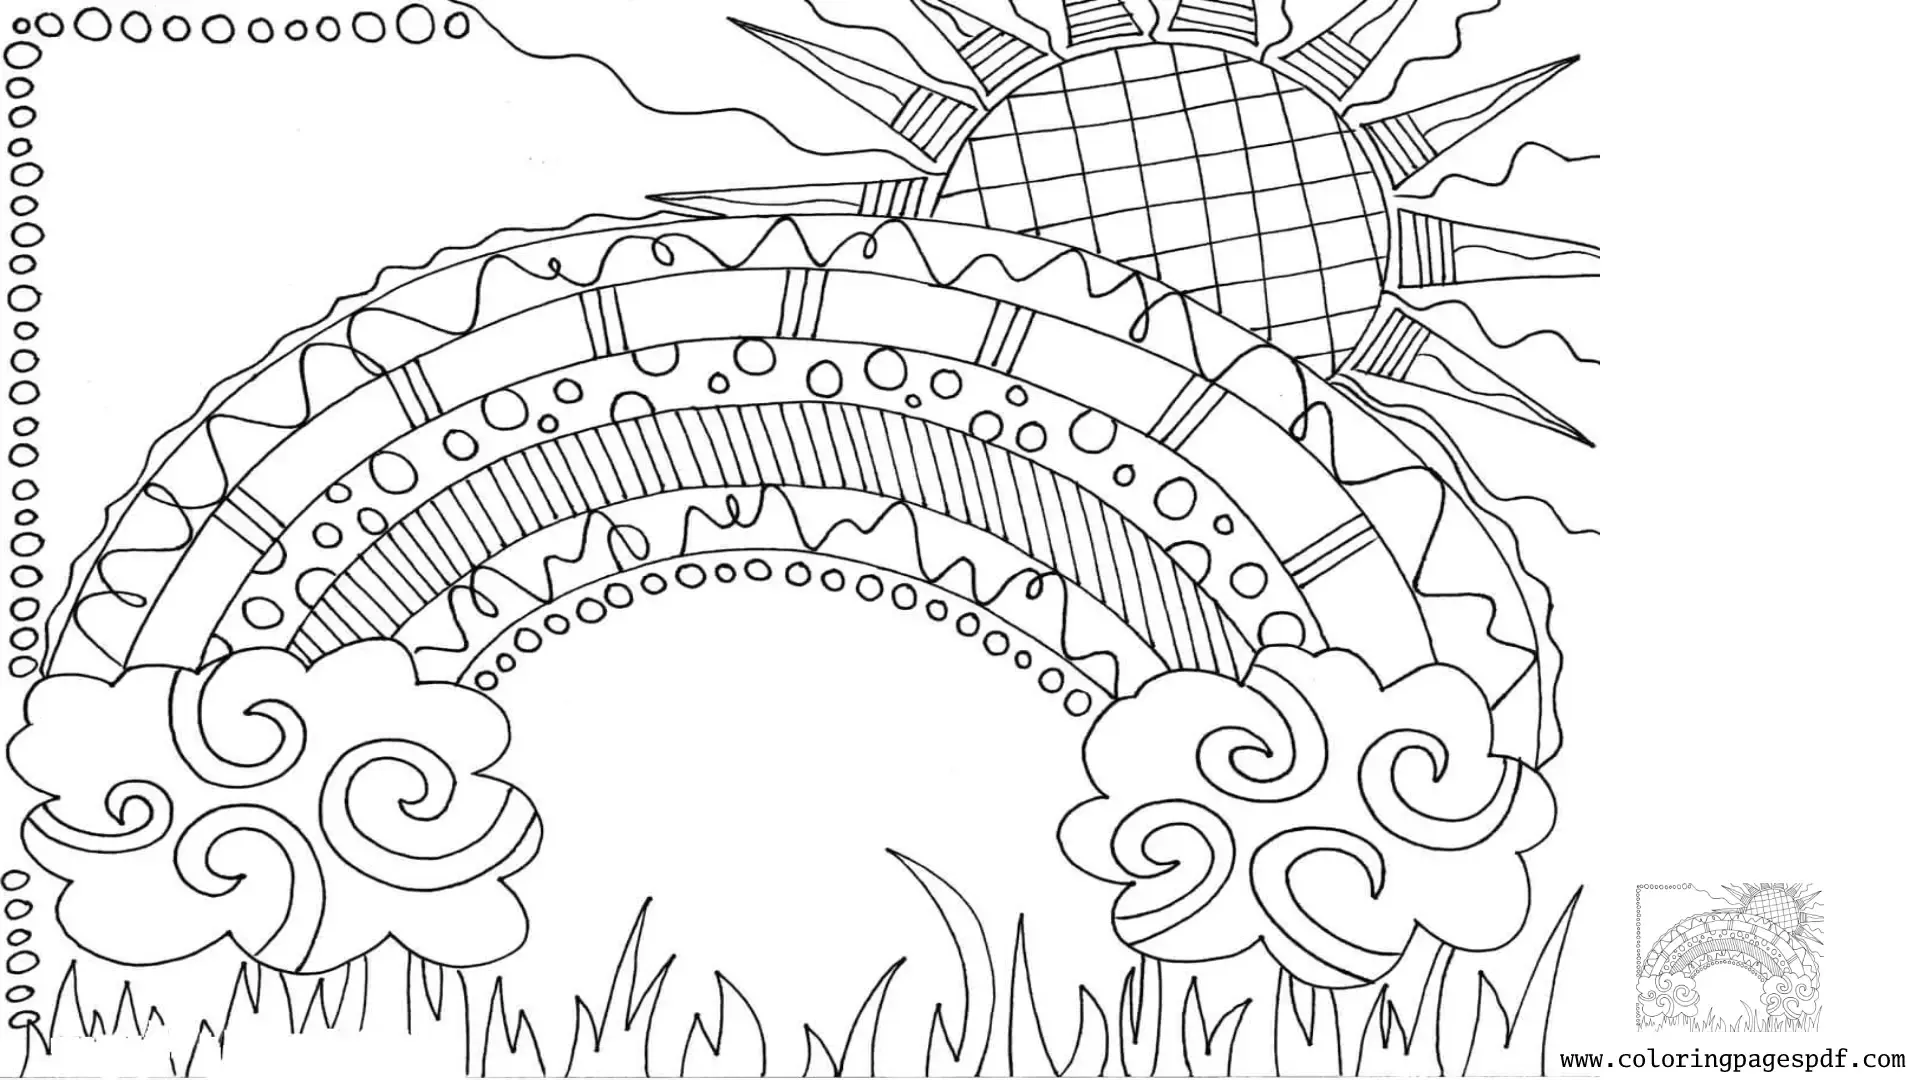 Coloring Pages Of A Rainbow Mandala